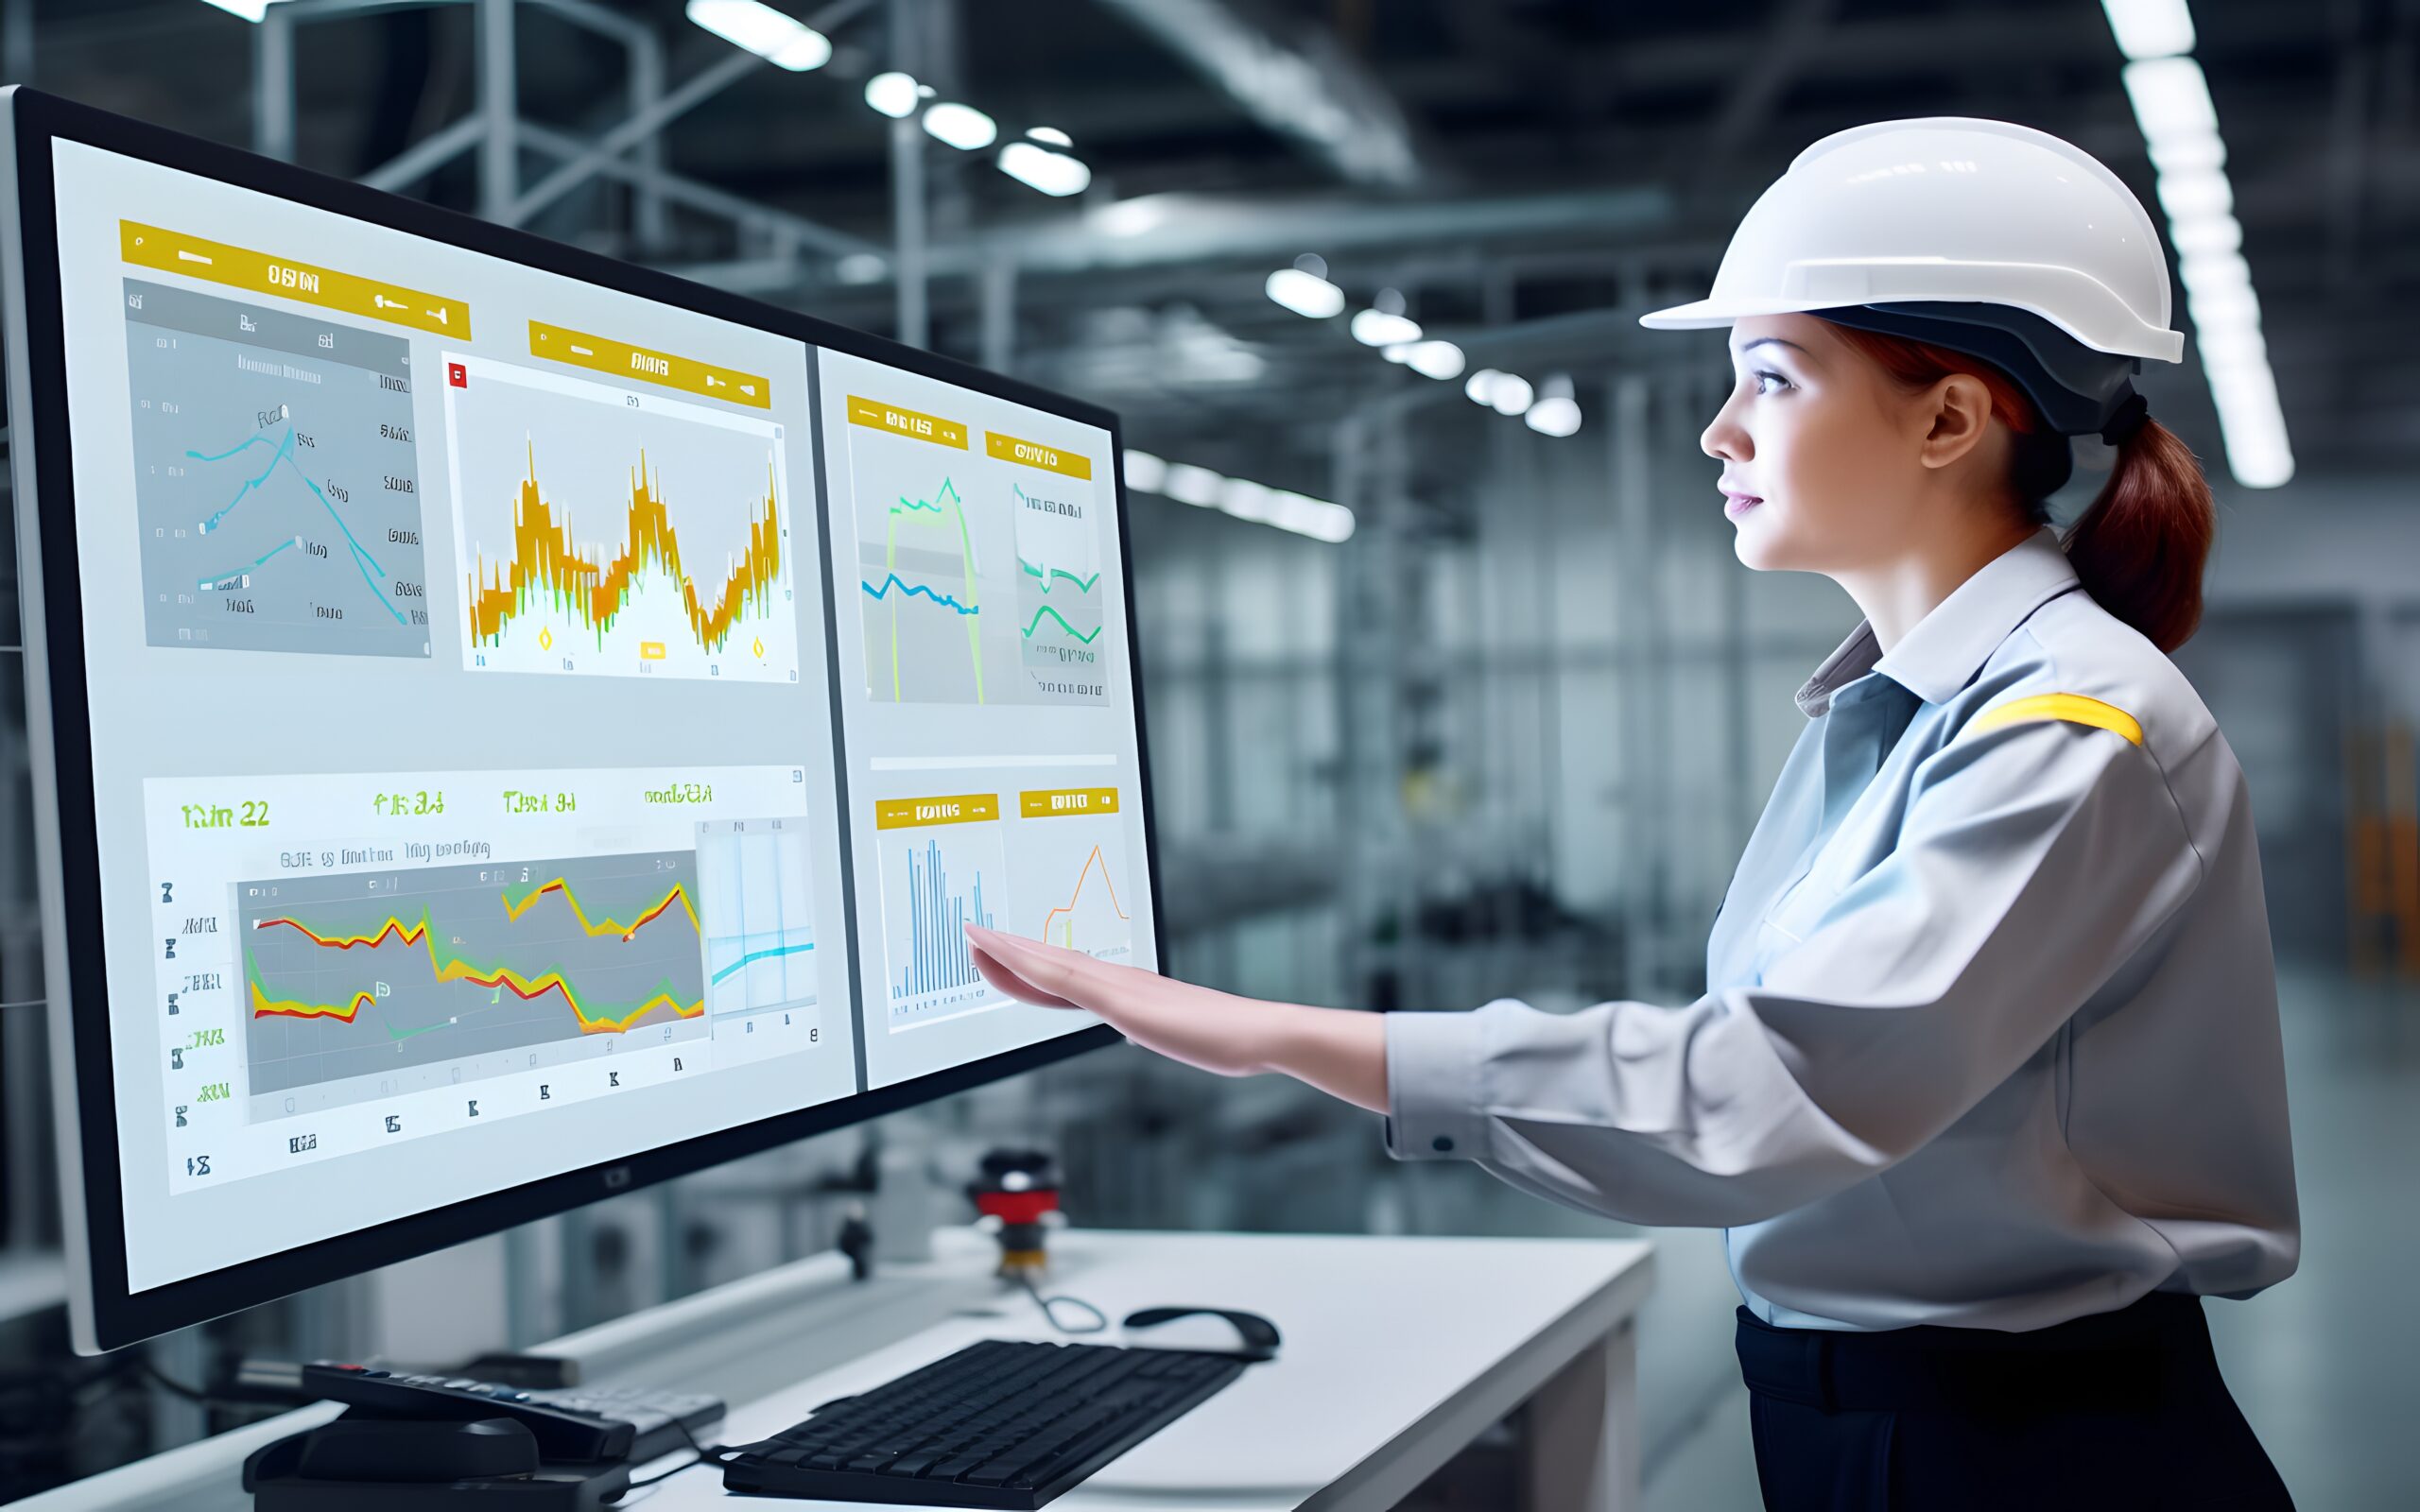 A factory worker monitoring production metrics and data on a computer screen, analyzing trends and making data-driven decisions to optimize productivity. Generative AI